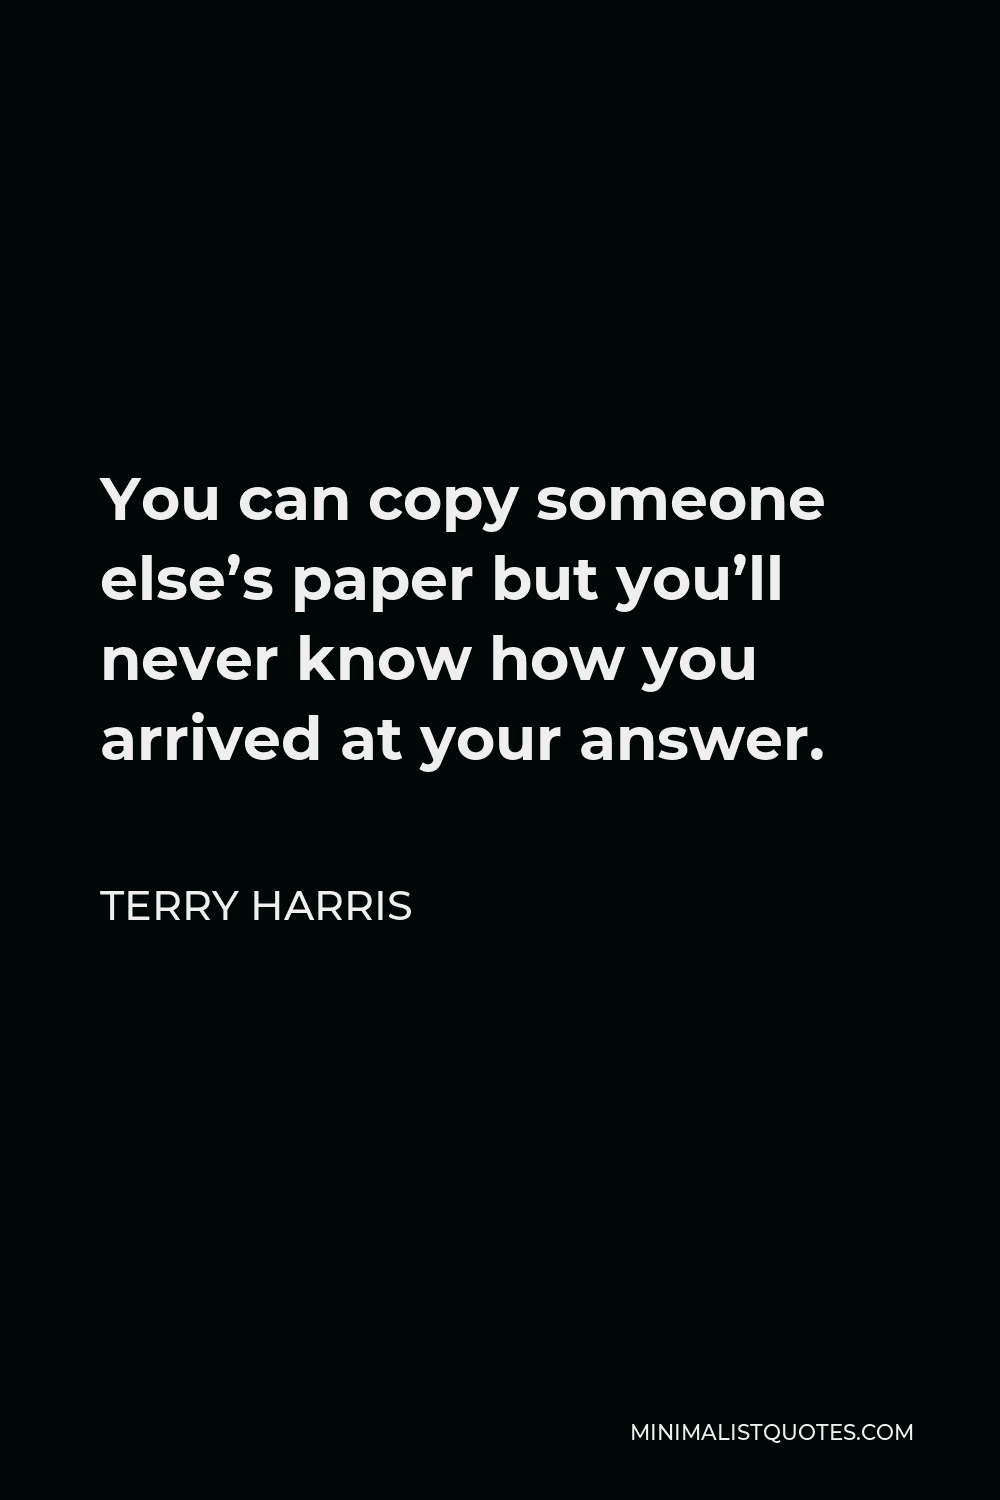 Terry Harris Quote - You can copy someone else’s paper but you’ll never know how you arrived at your answer.